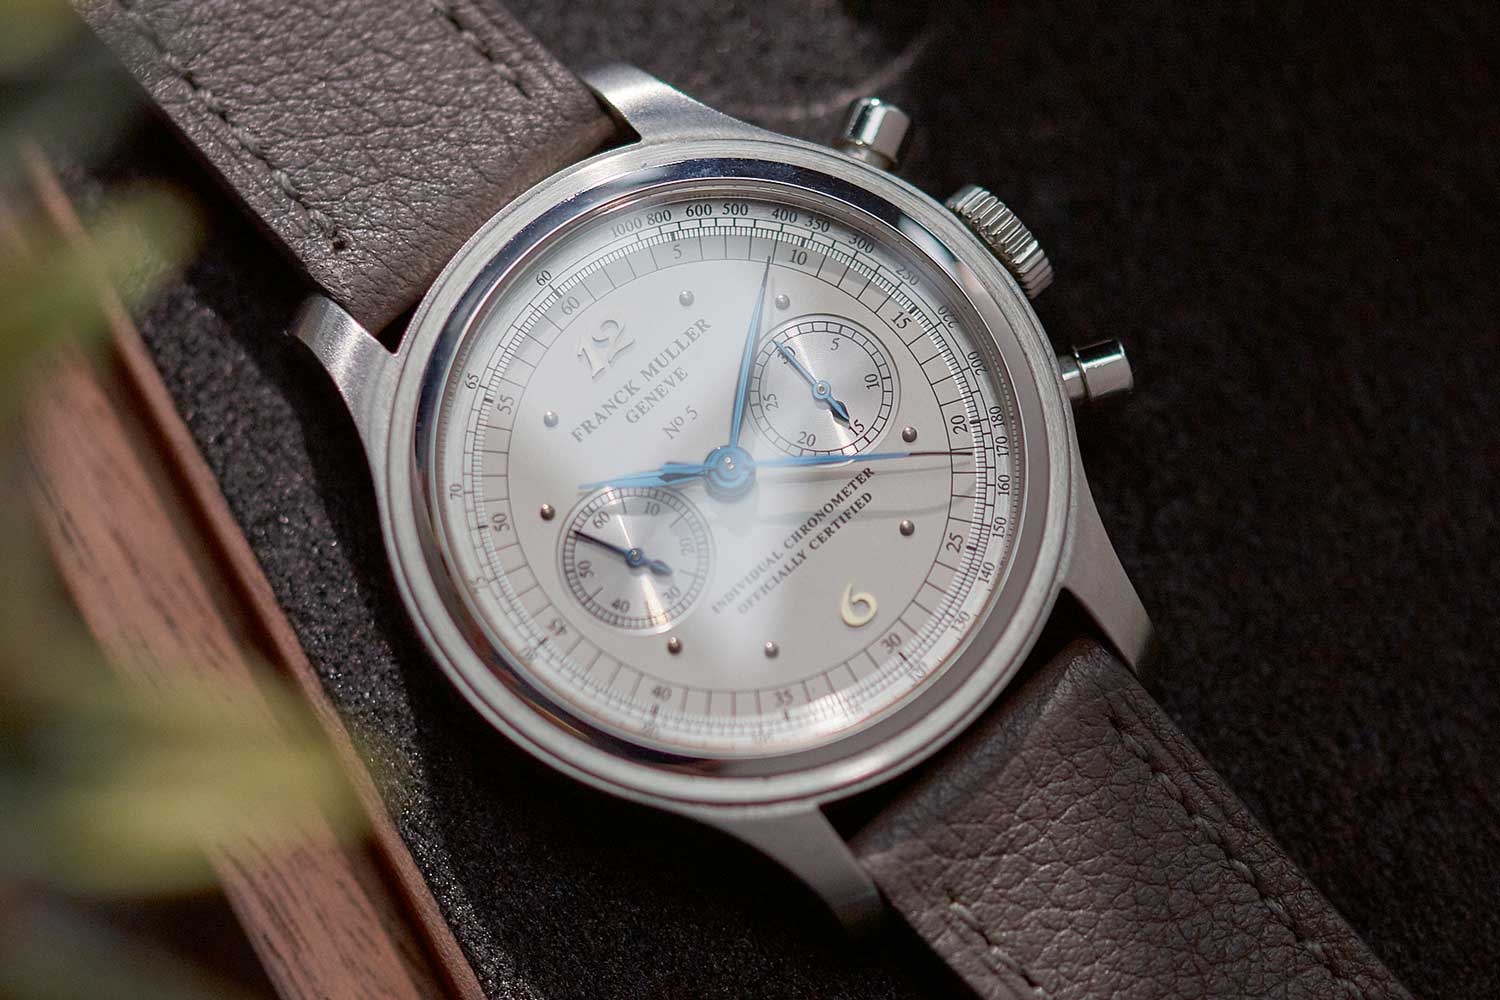 An early production Franck Muller Chronograph in a round case (Image: A Collected Man)